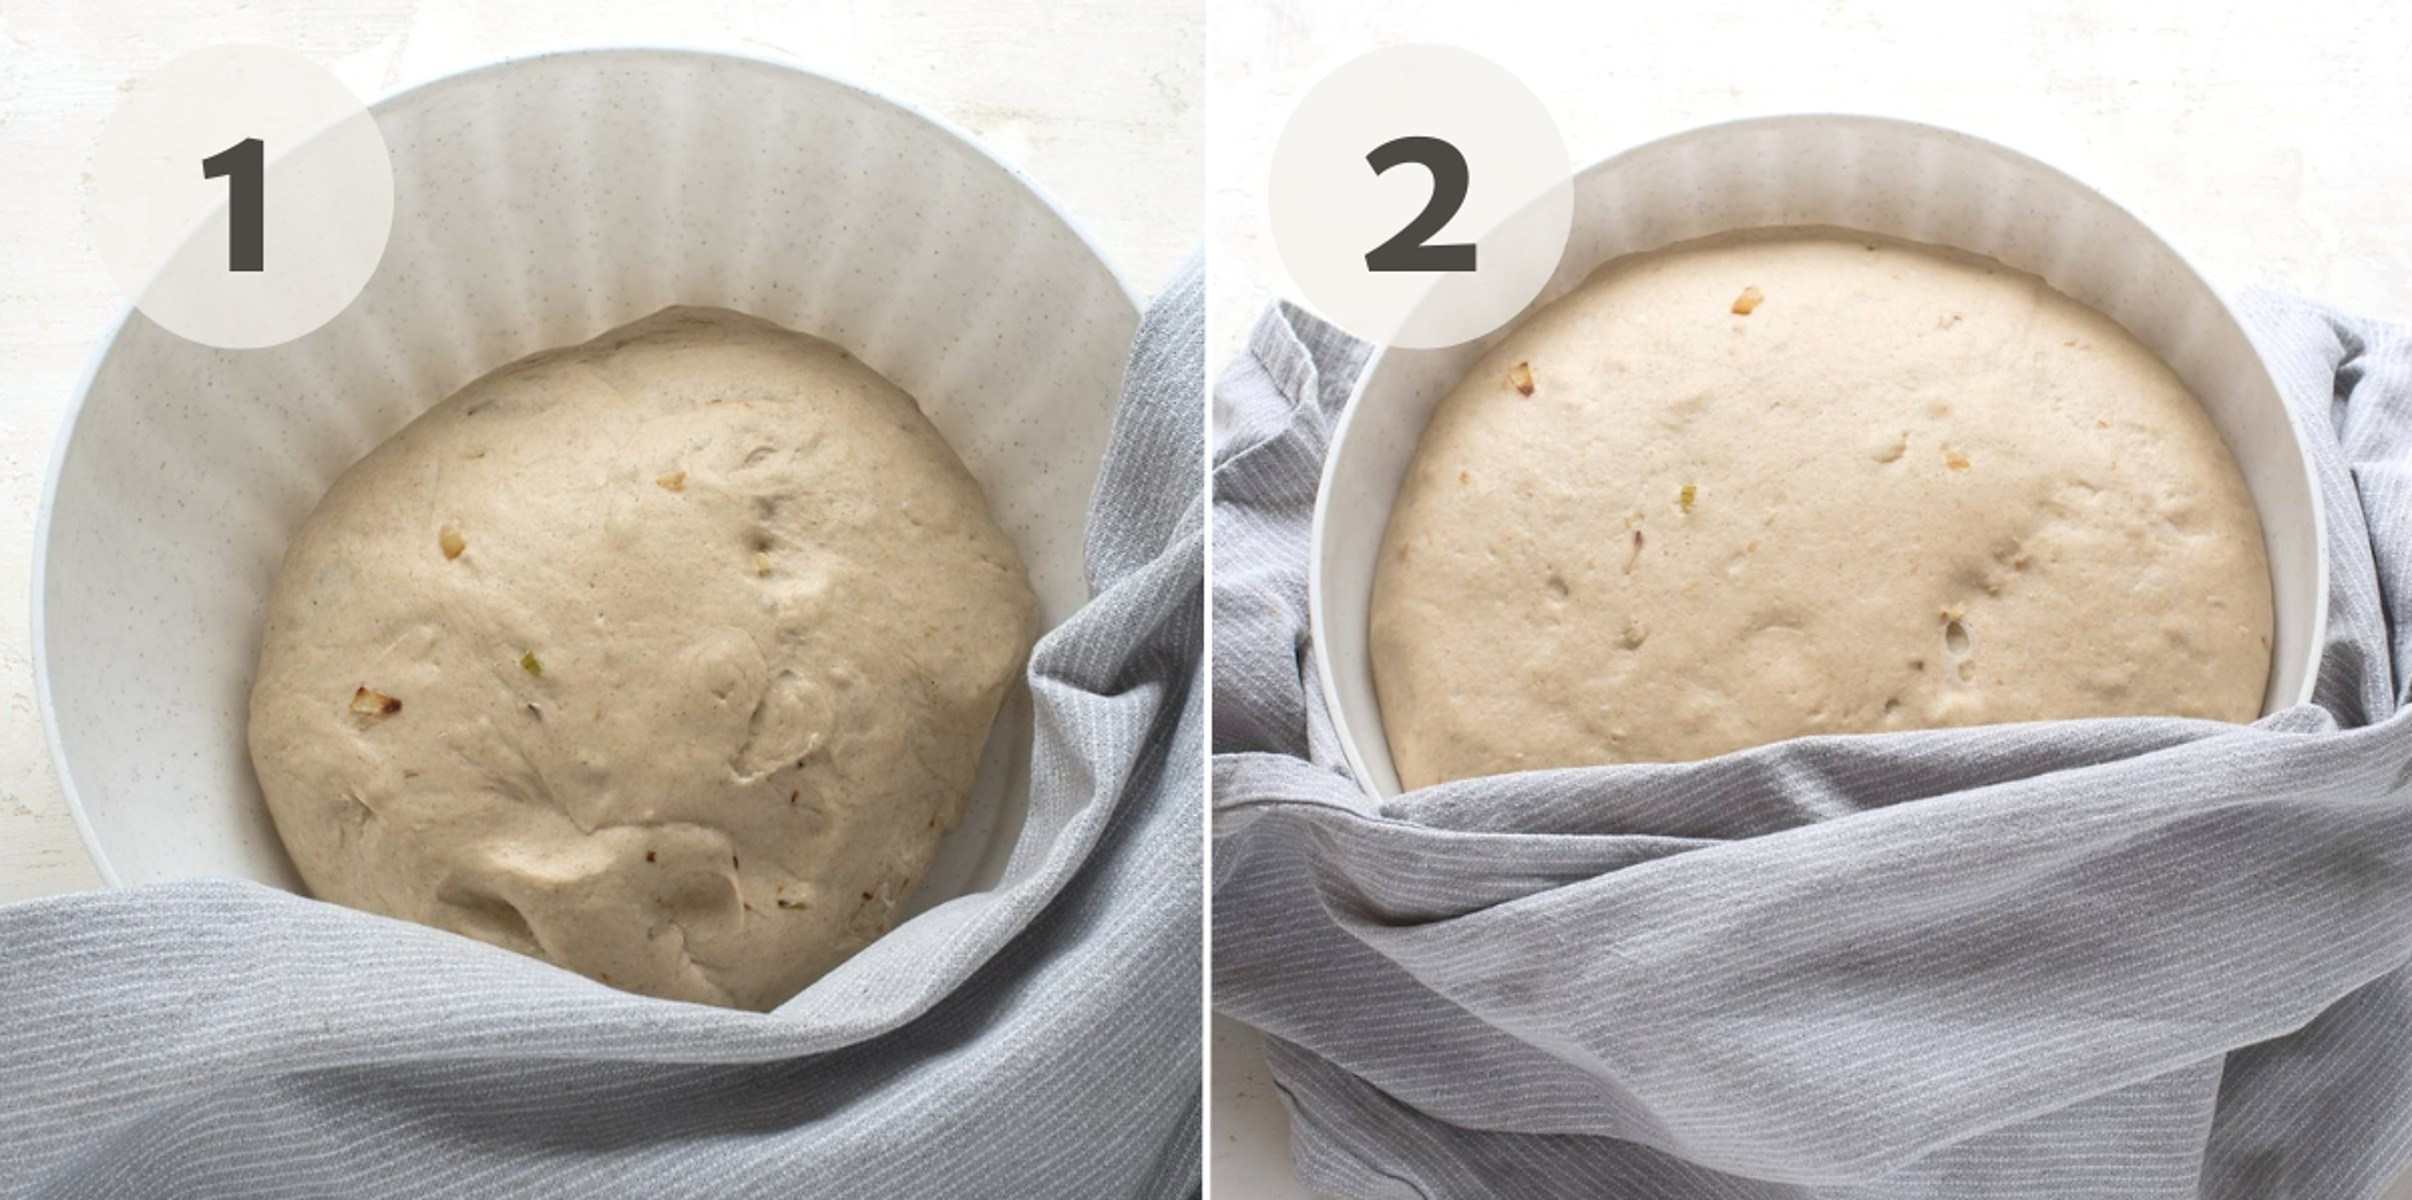 Two pictures showing yeast dough freshly kneaded and after doubled in size after rising, in a white bowl, partly covered with a grey tea towel.